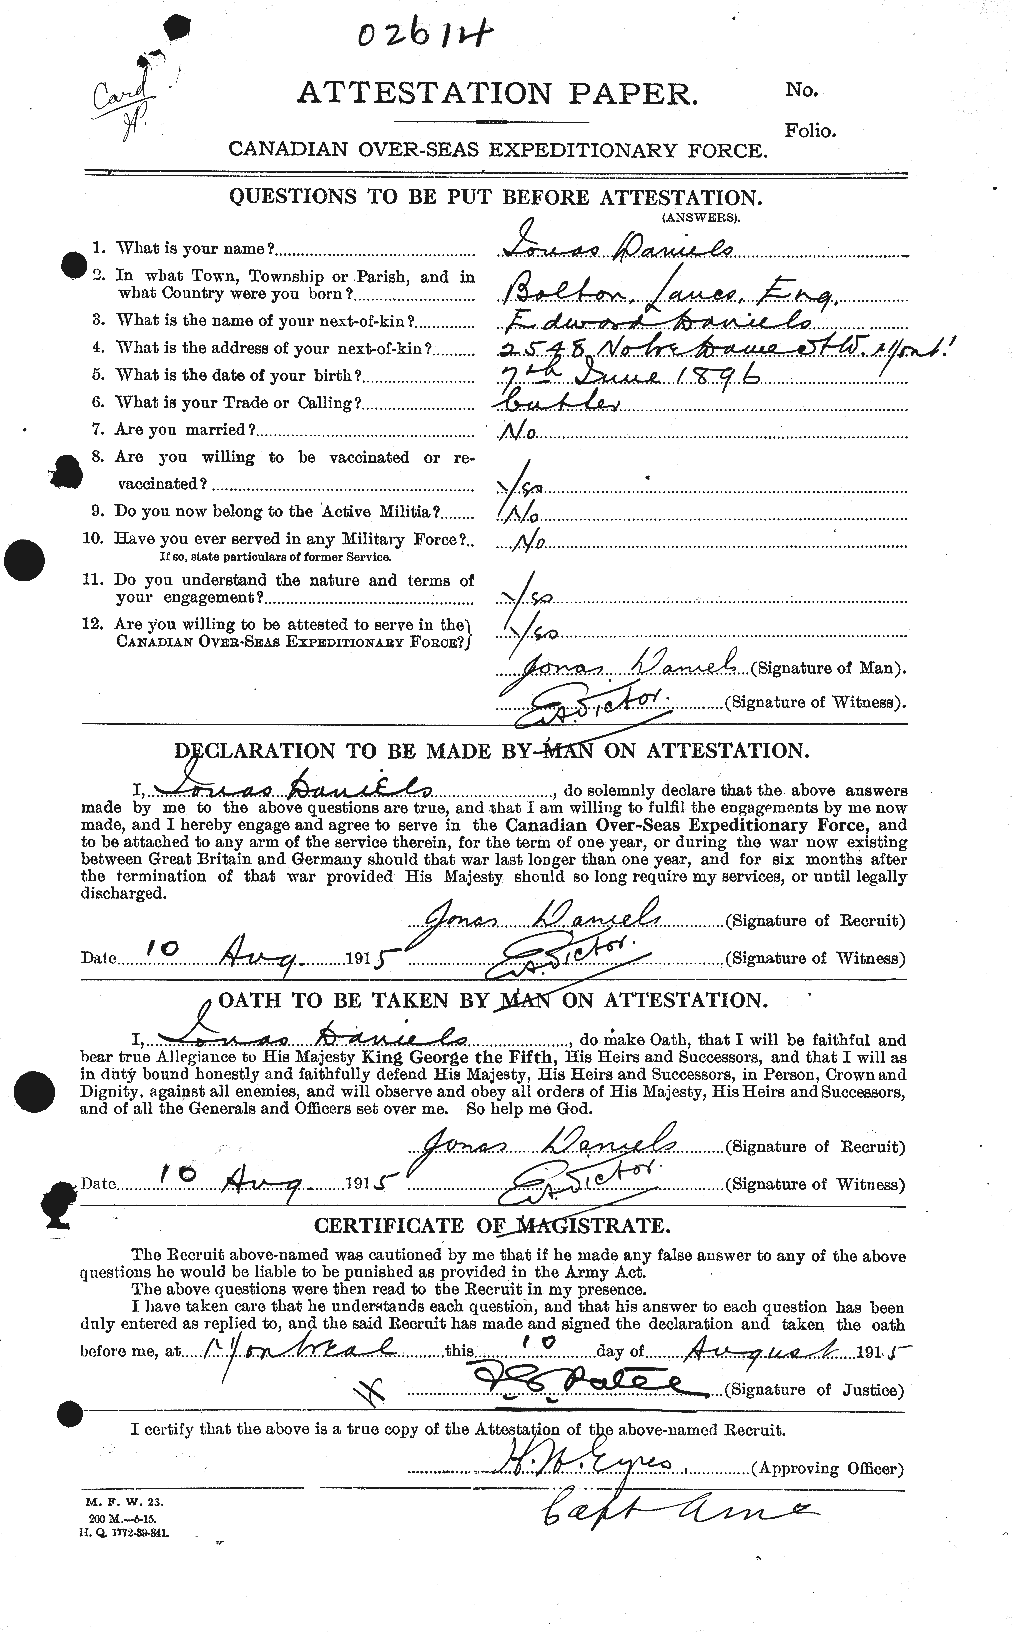 Personnel Records of the First World War - CEF 279647a